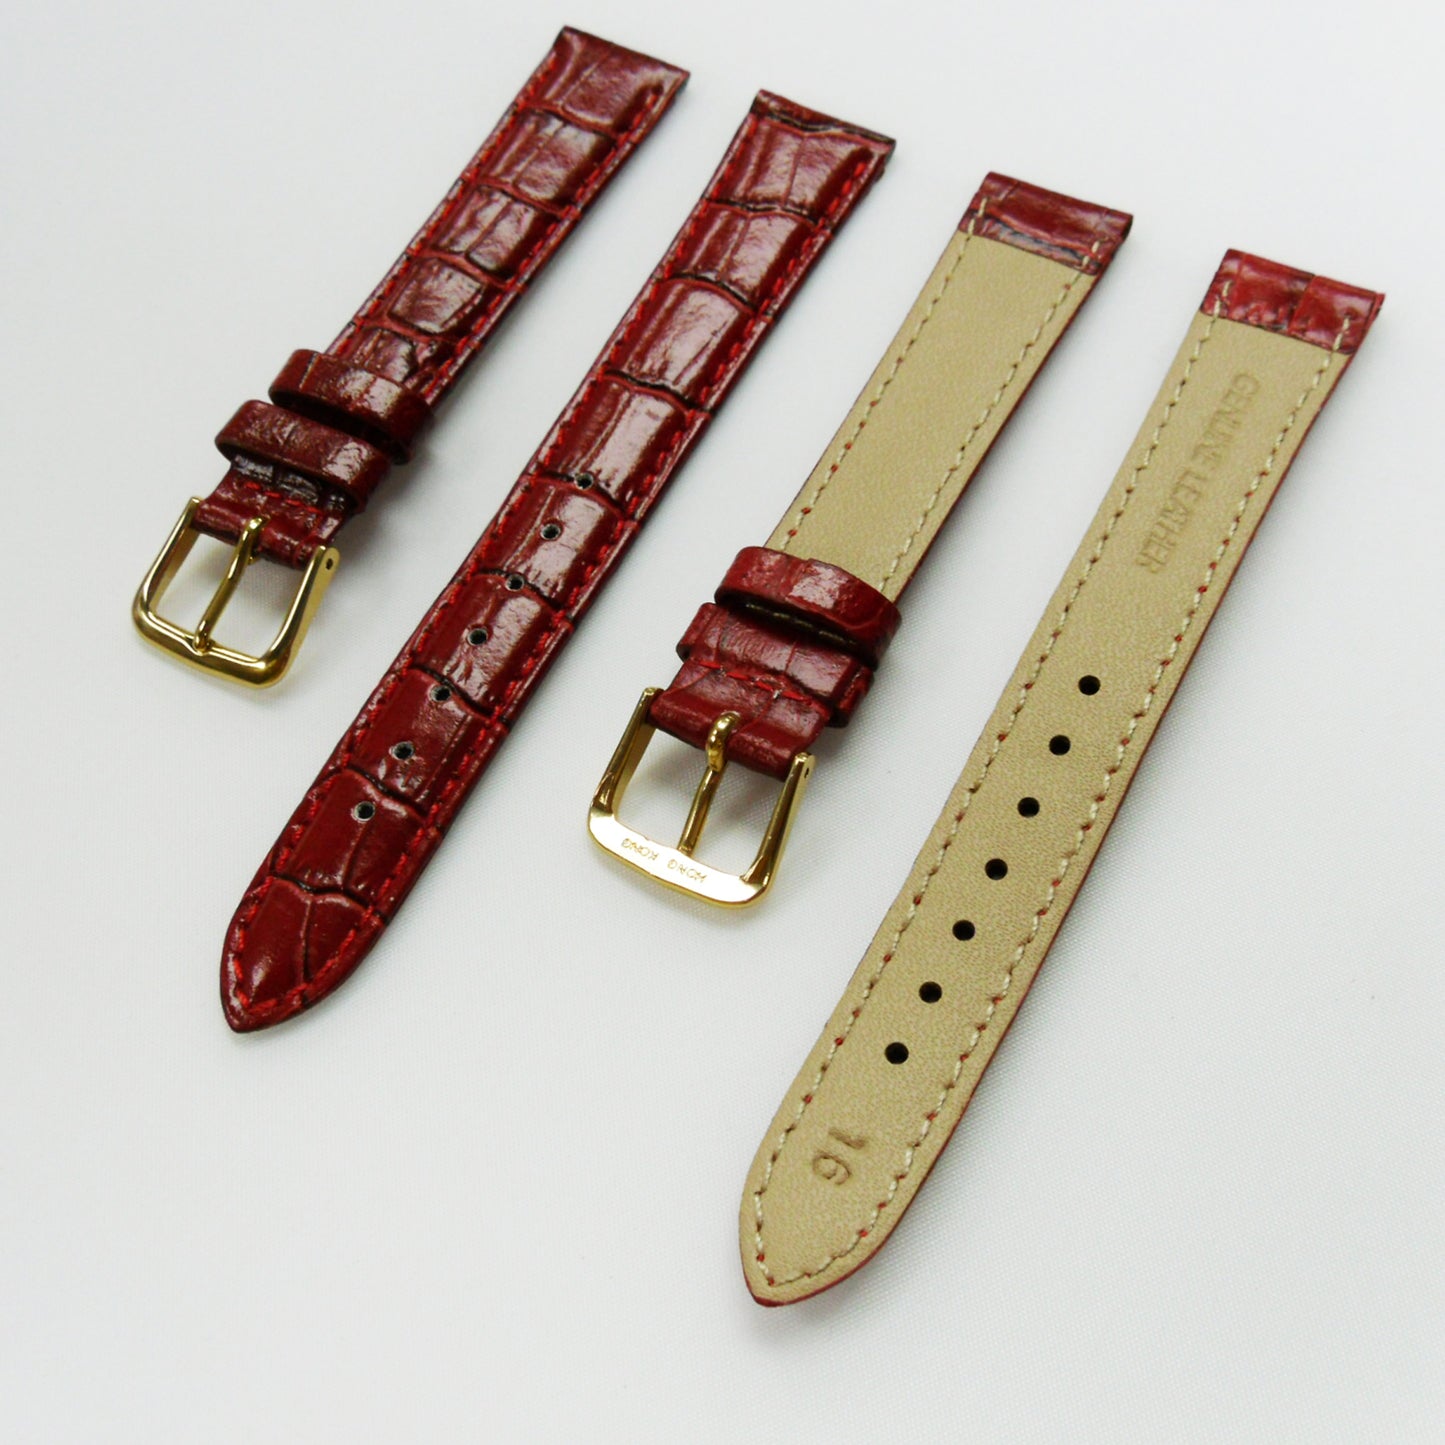 Crocodile Watch Grain Strap For Men 16 MM Band Red Color, Regular Size, Watch Band Replacement